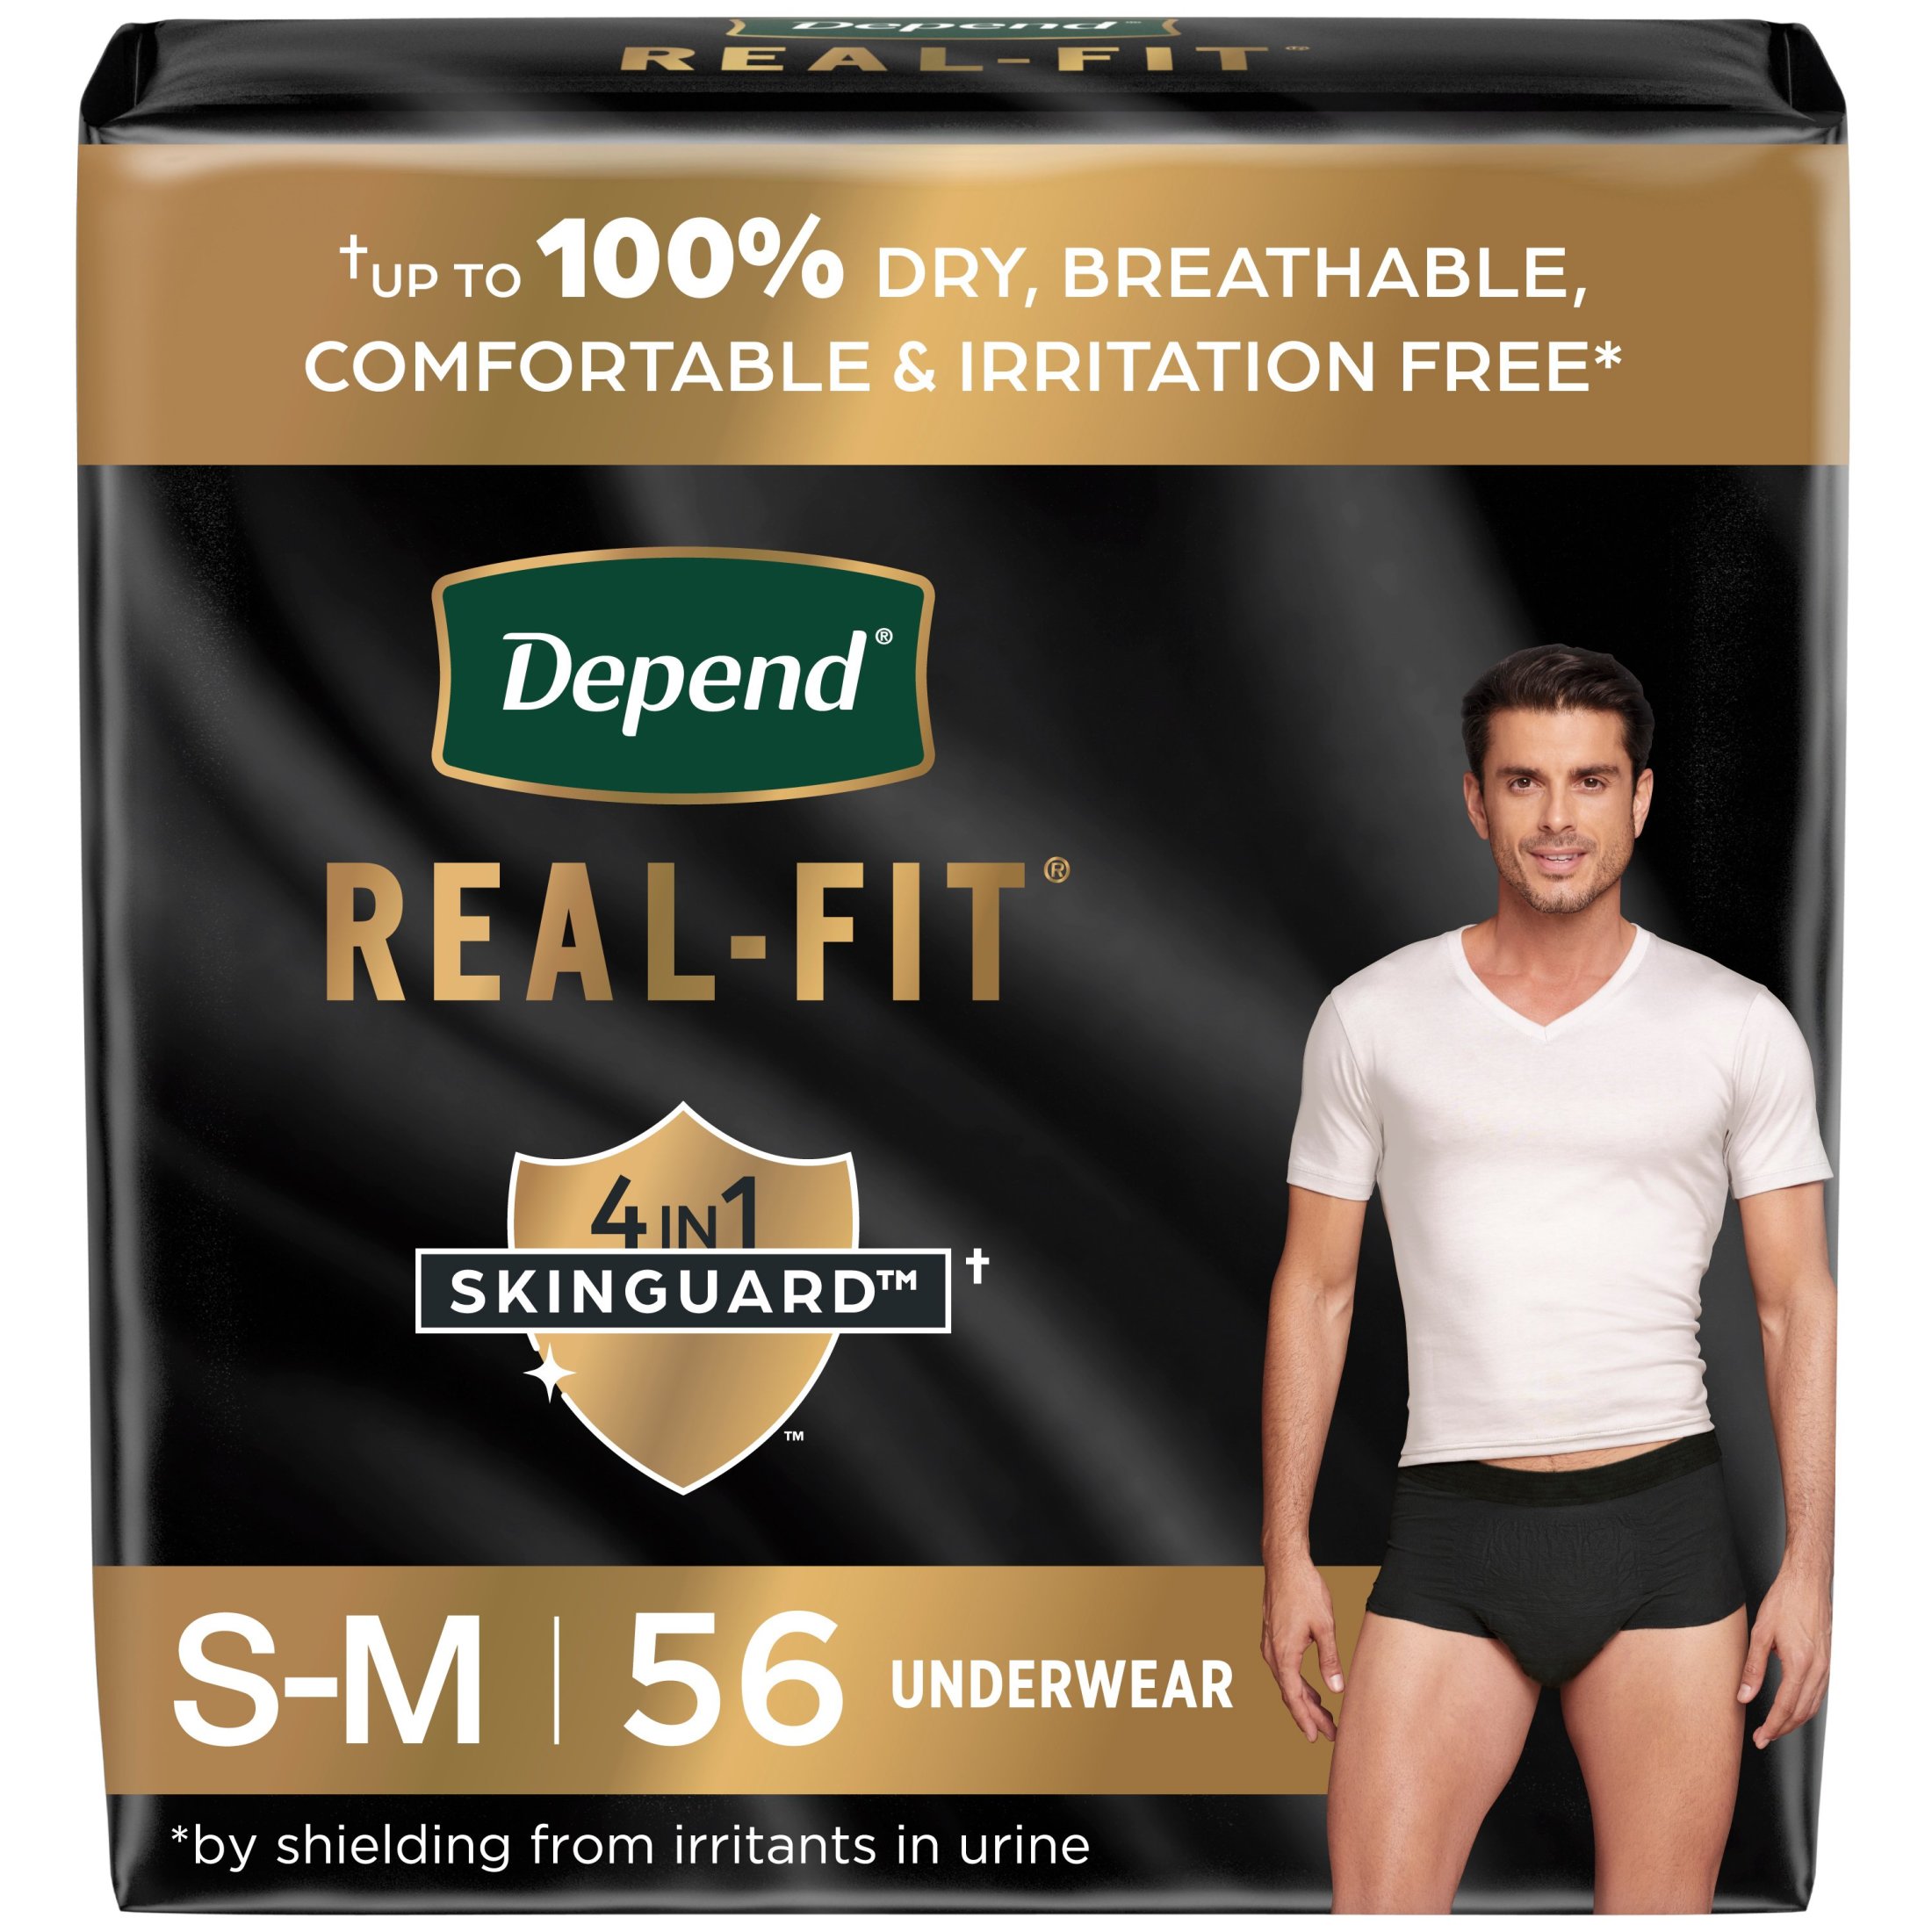 Depend Real Fit Men's Incontinence Underwear, Maximum Absorbency, S/M, Black, 56 Count - image 1 of 9